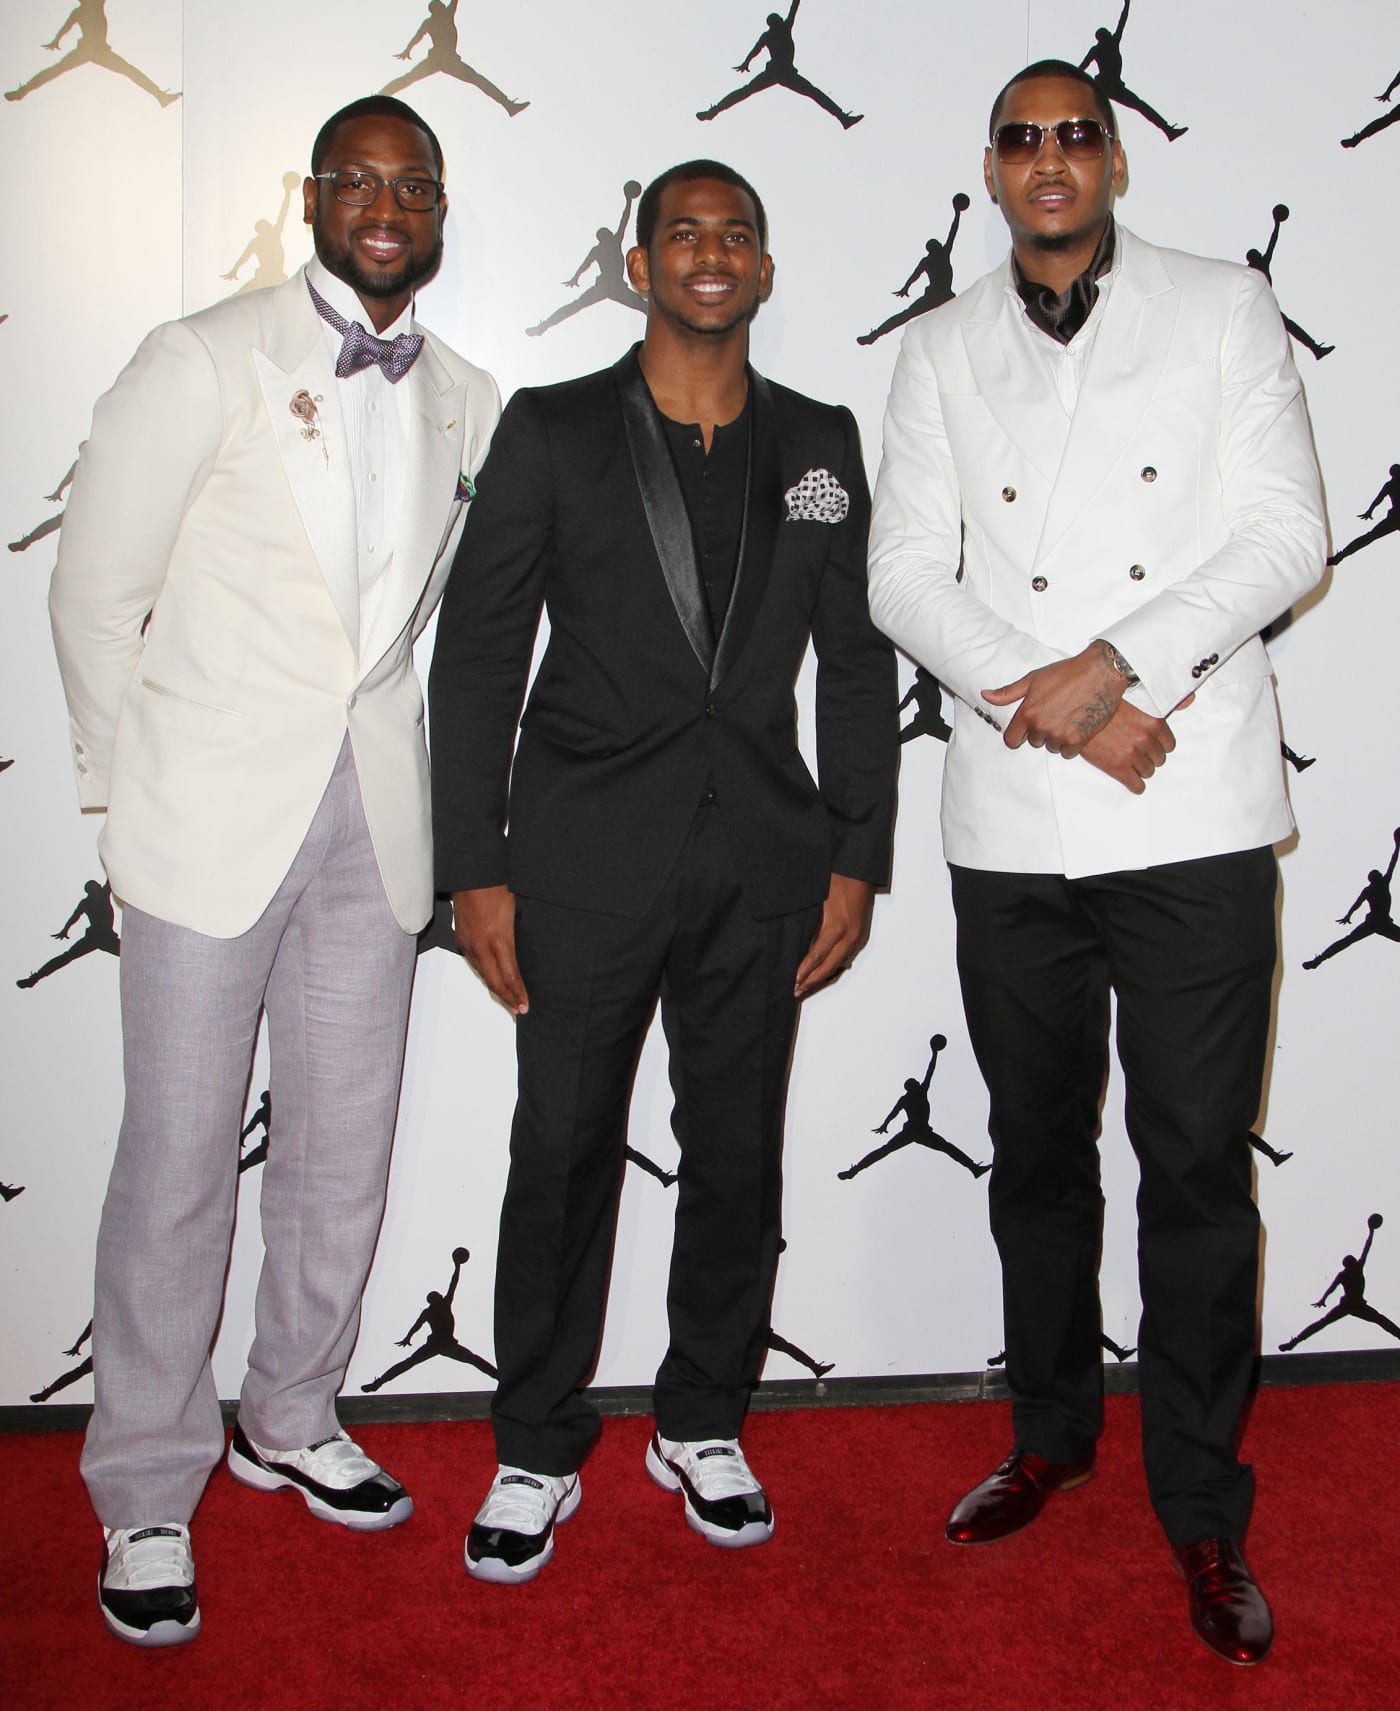 Really Wear Air Jordan 11s With a Suit 